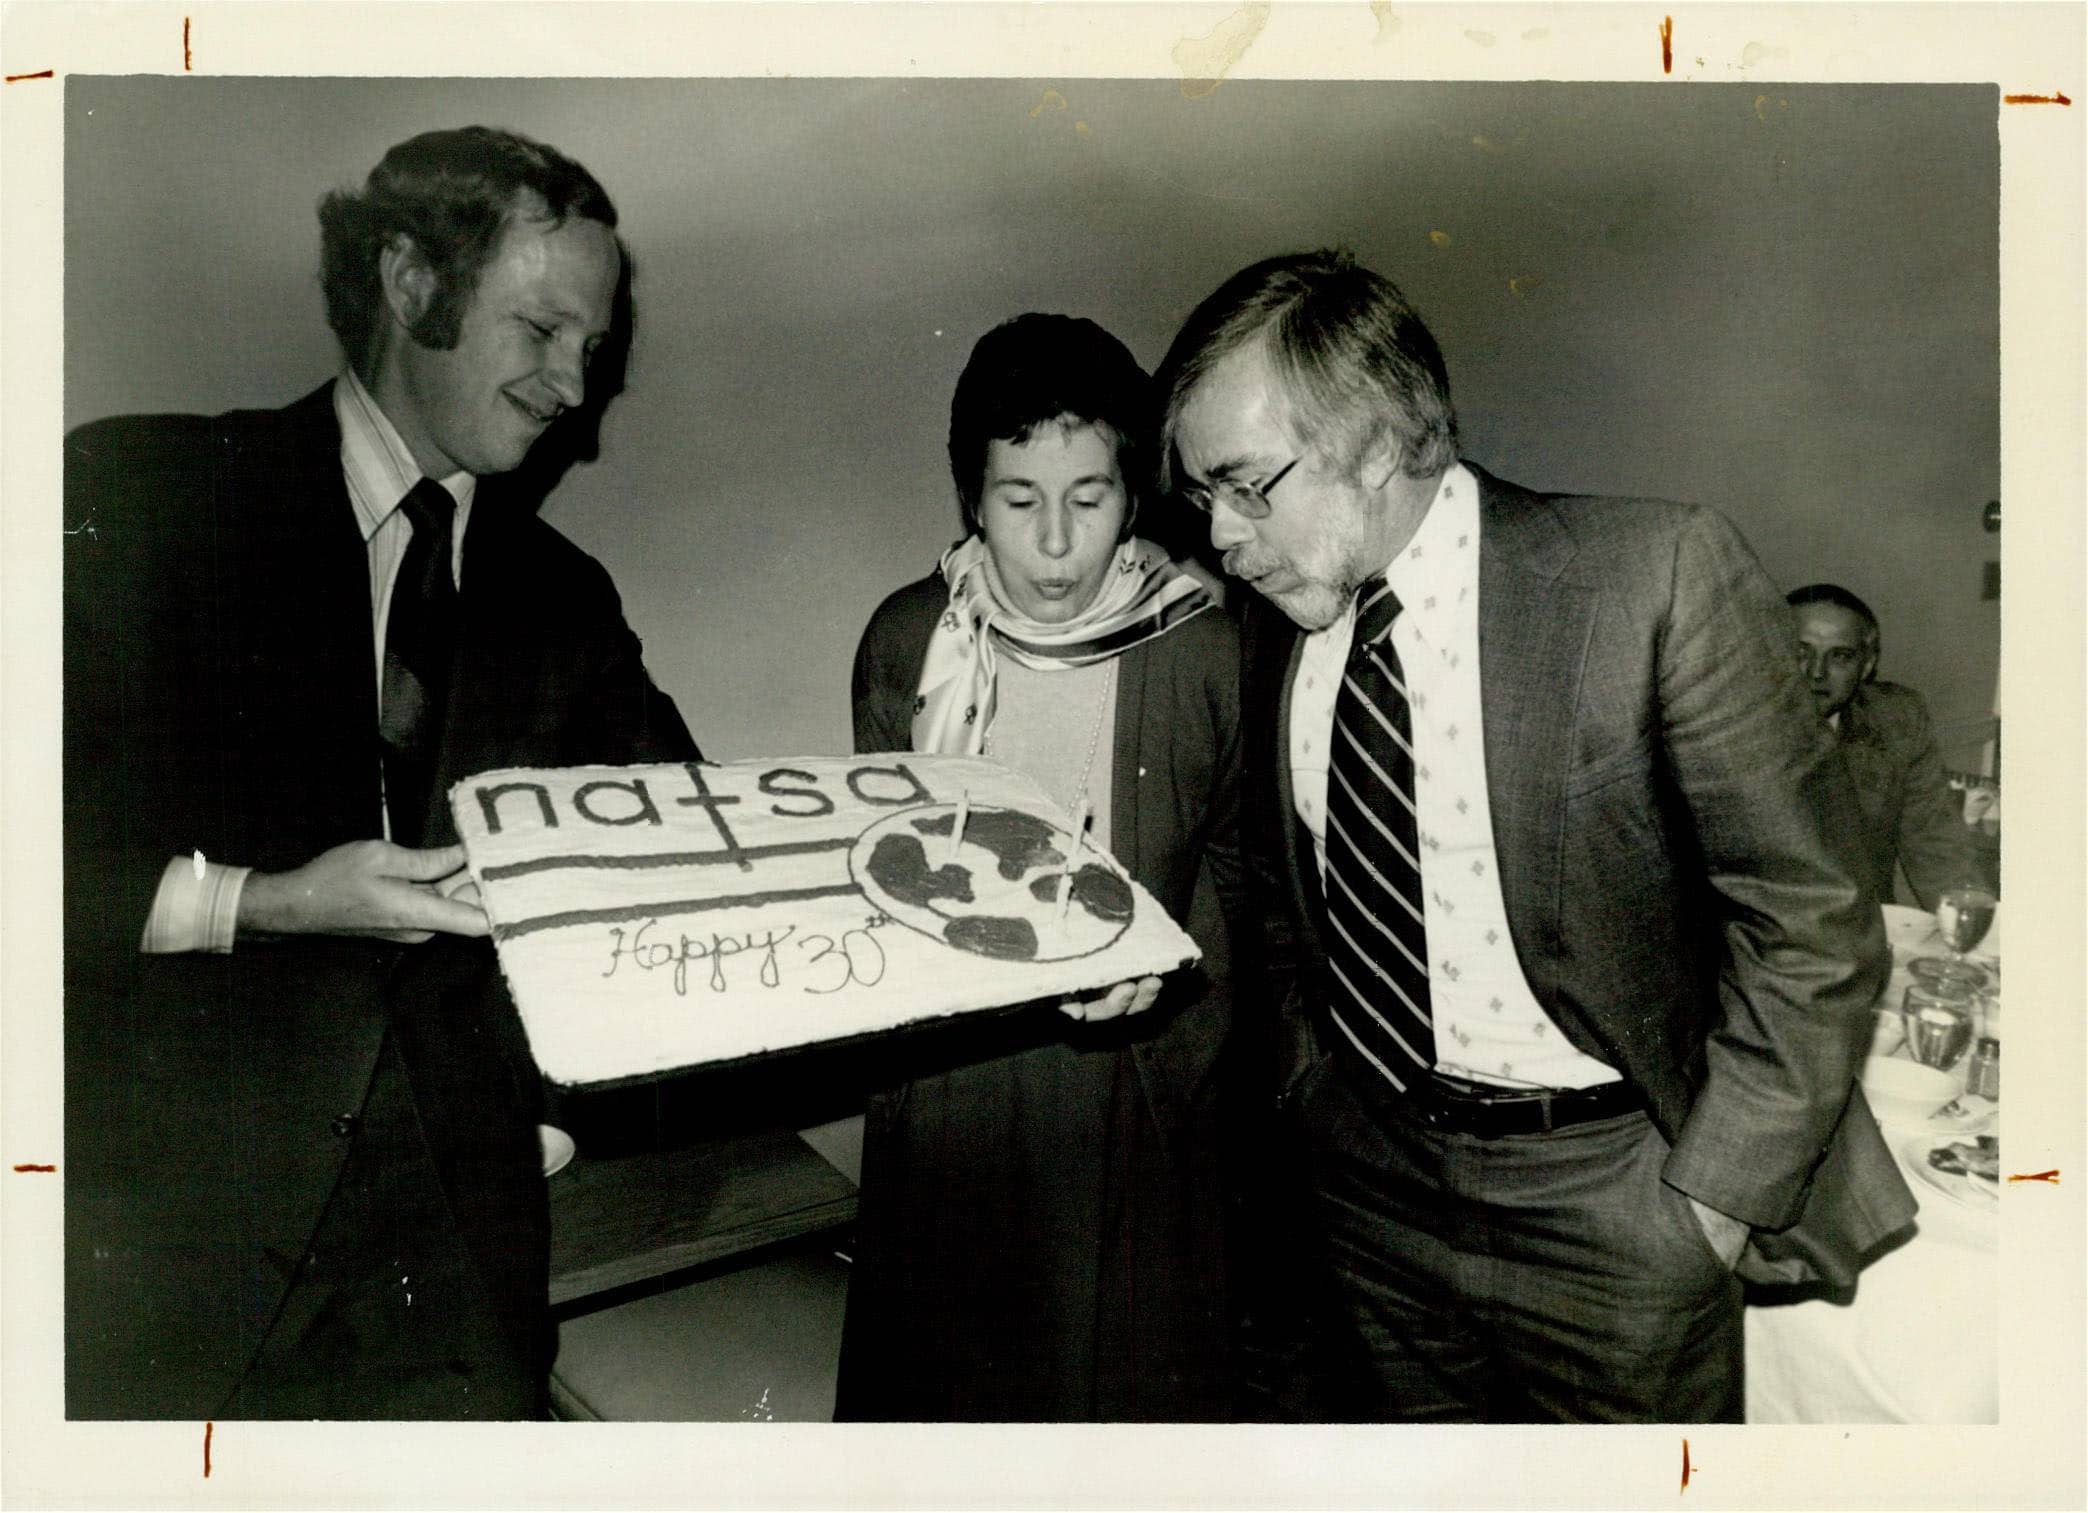 NAFSA celebrated 30 years at the 1978 conference in Ames, Iowa.